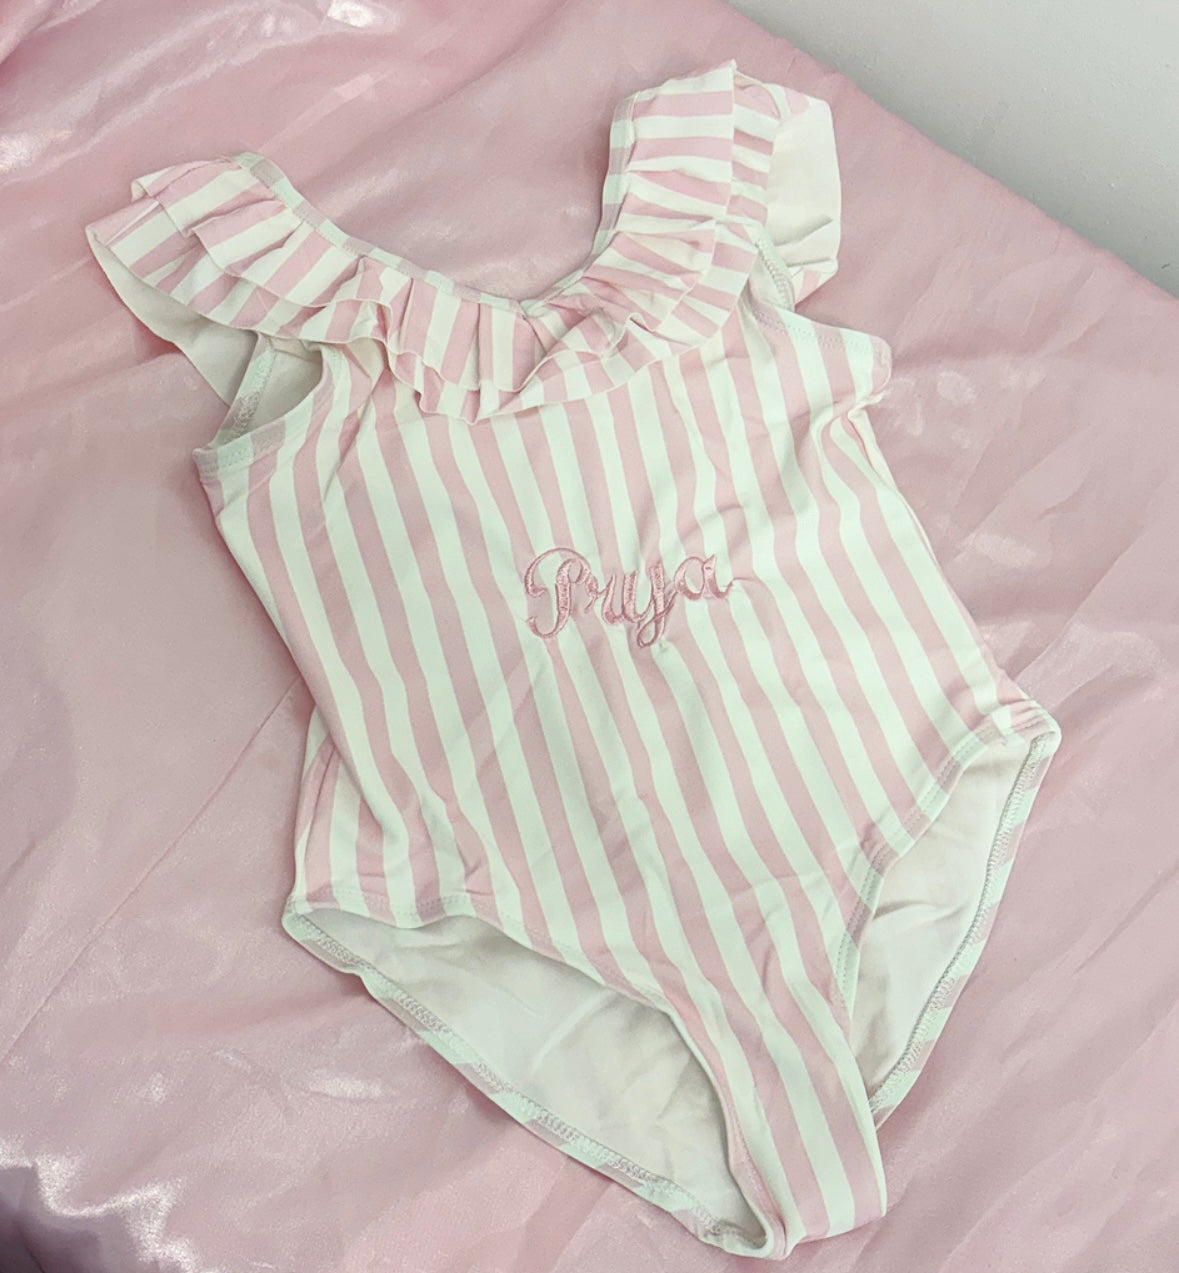 WOMENS PERSONALISED PINK STRIPED SWIMMING COSTUME 2-4 WEEKS